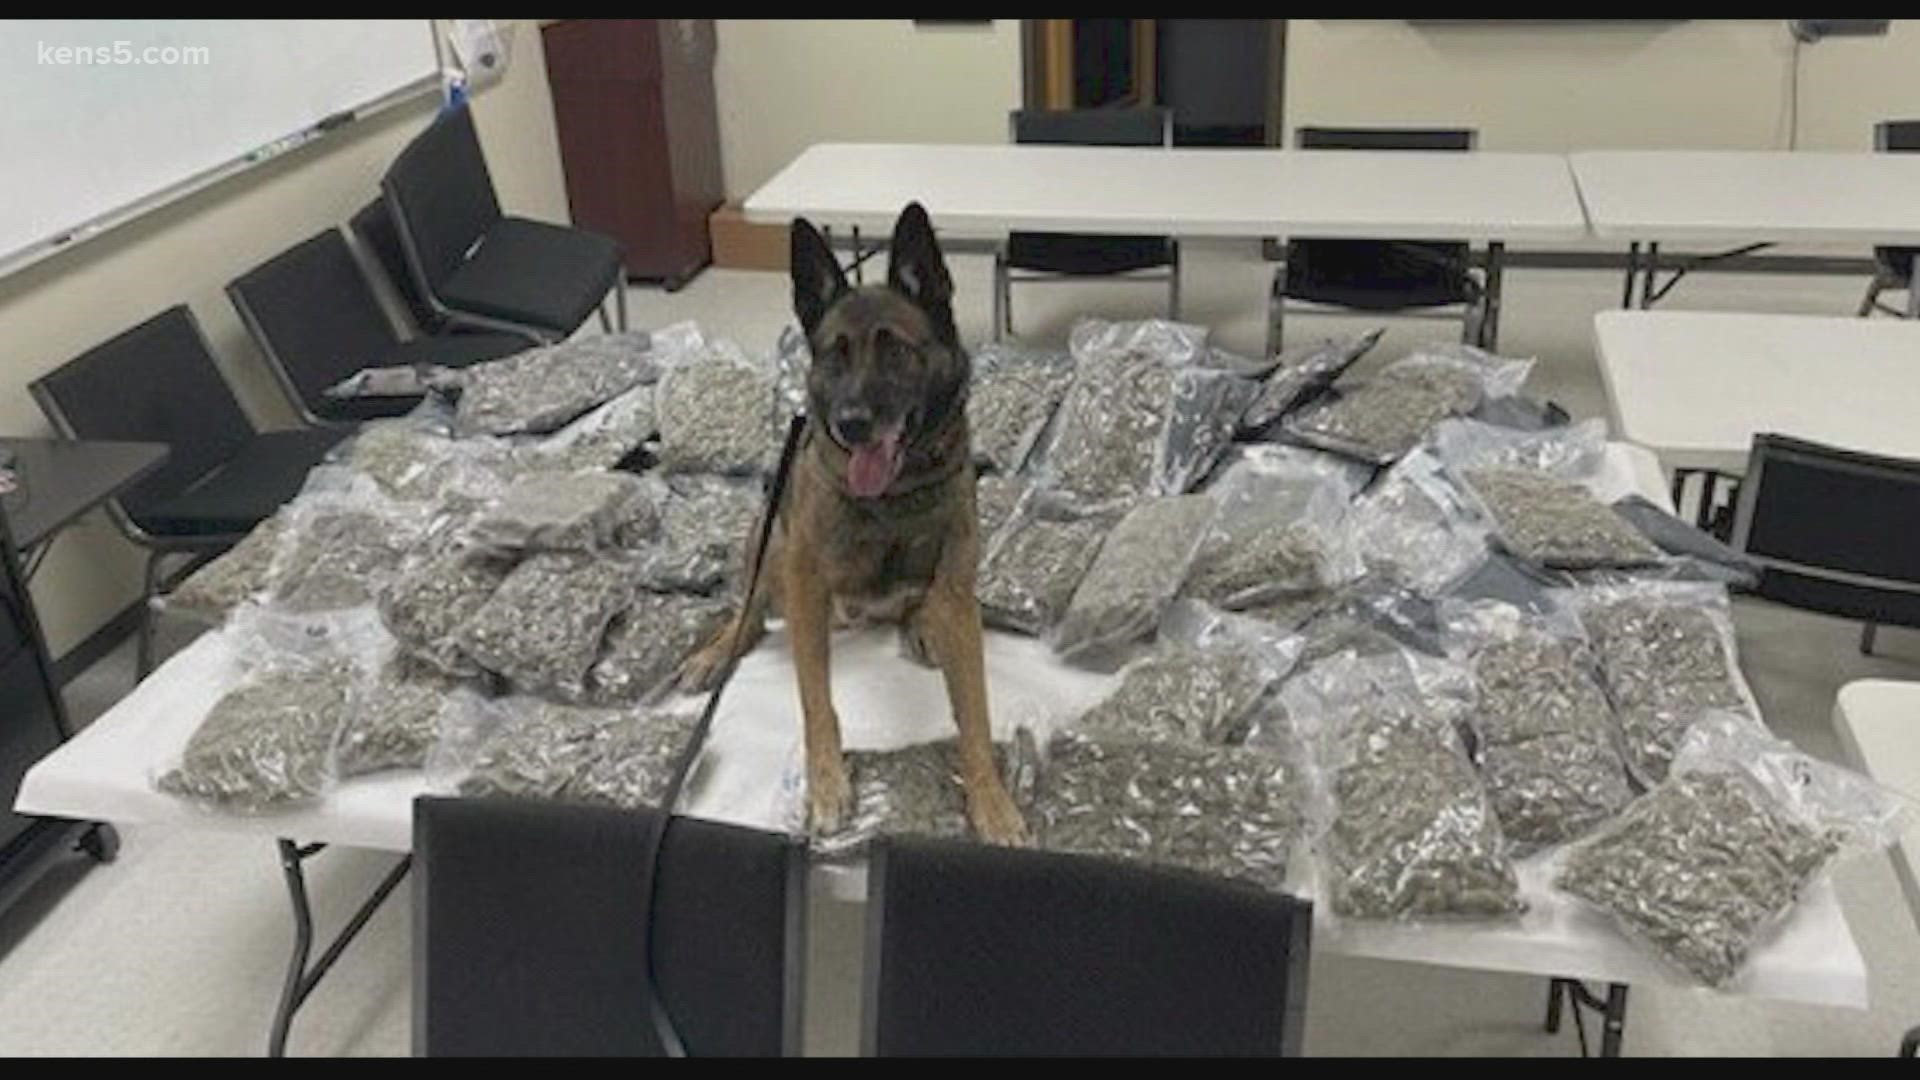 K-9 Officer Turbo led police to the duffel bags stuffed in the trunk.